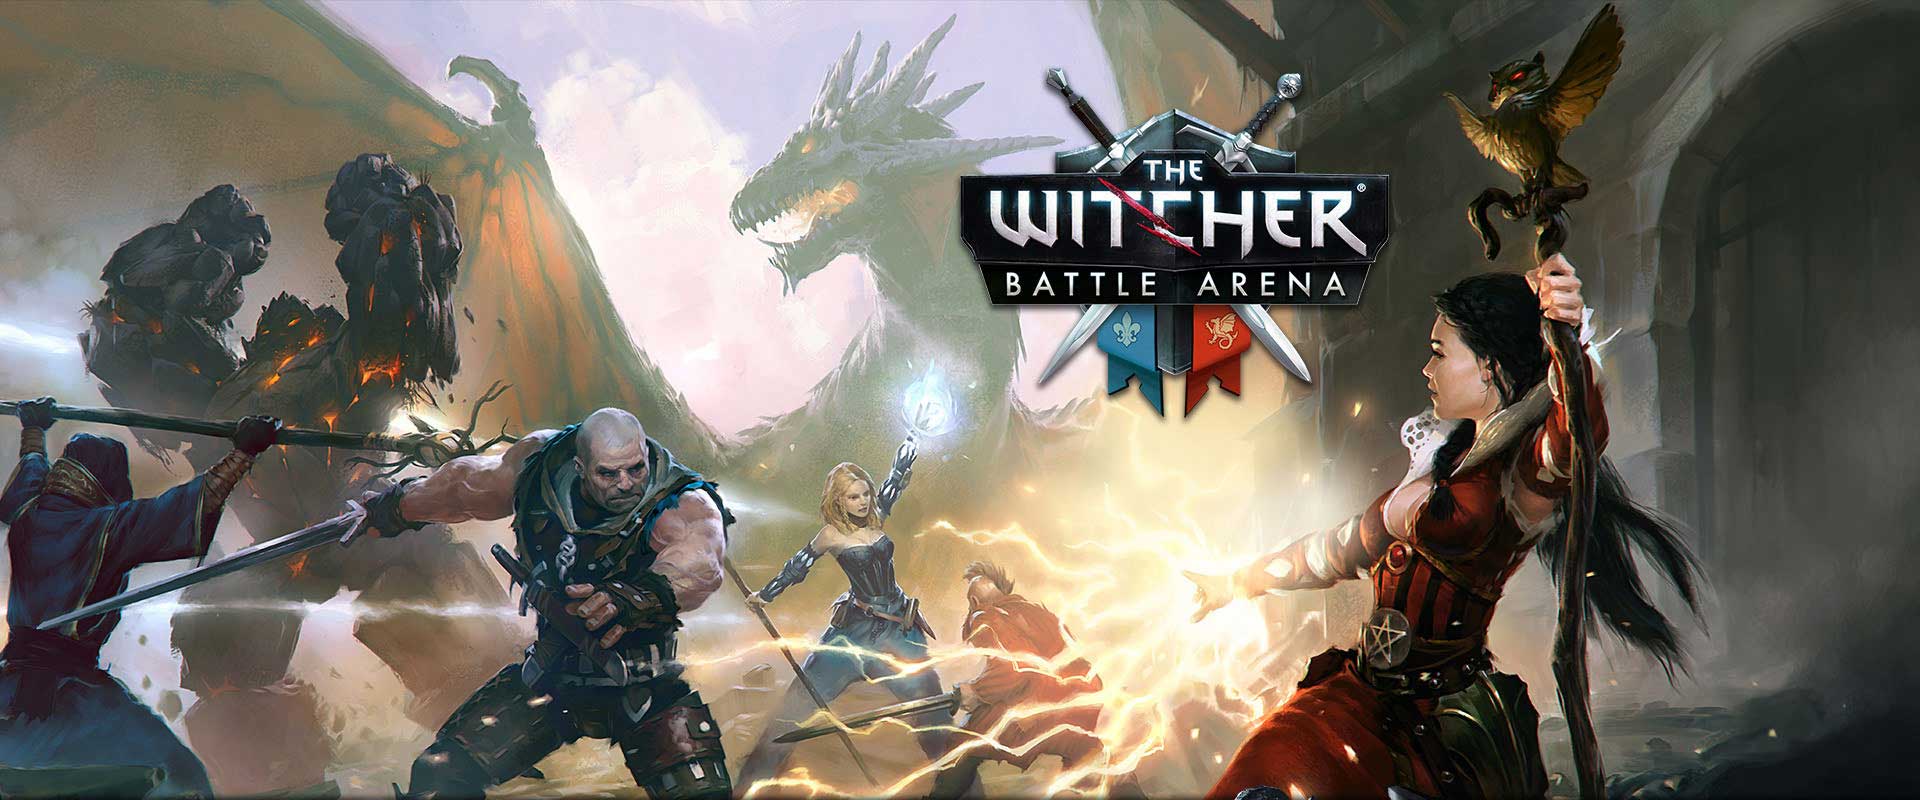 1920x800 > The Witcher: Battle Arena Wallpapers